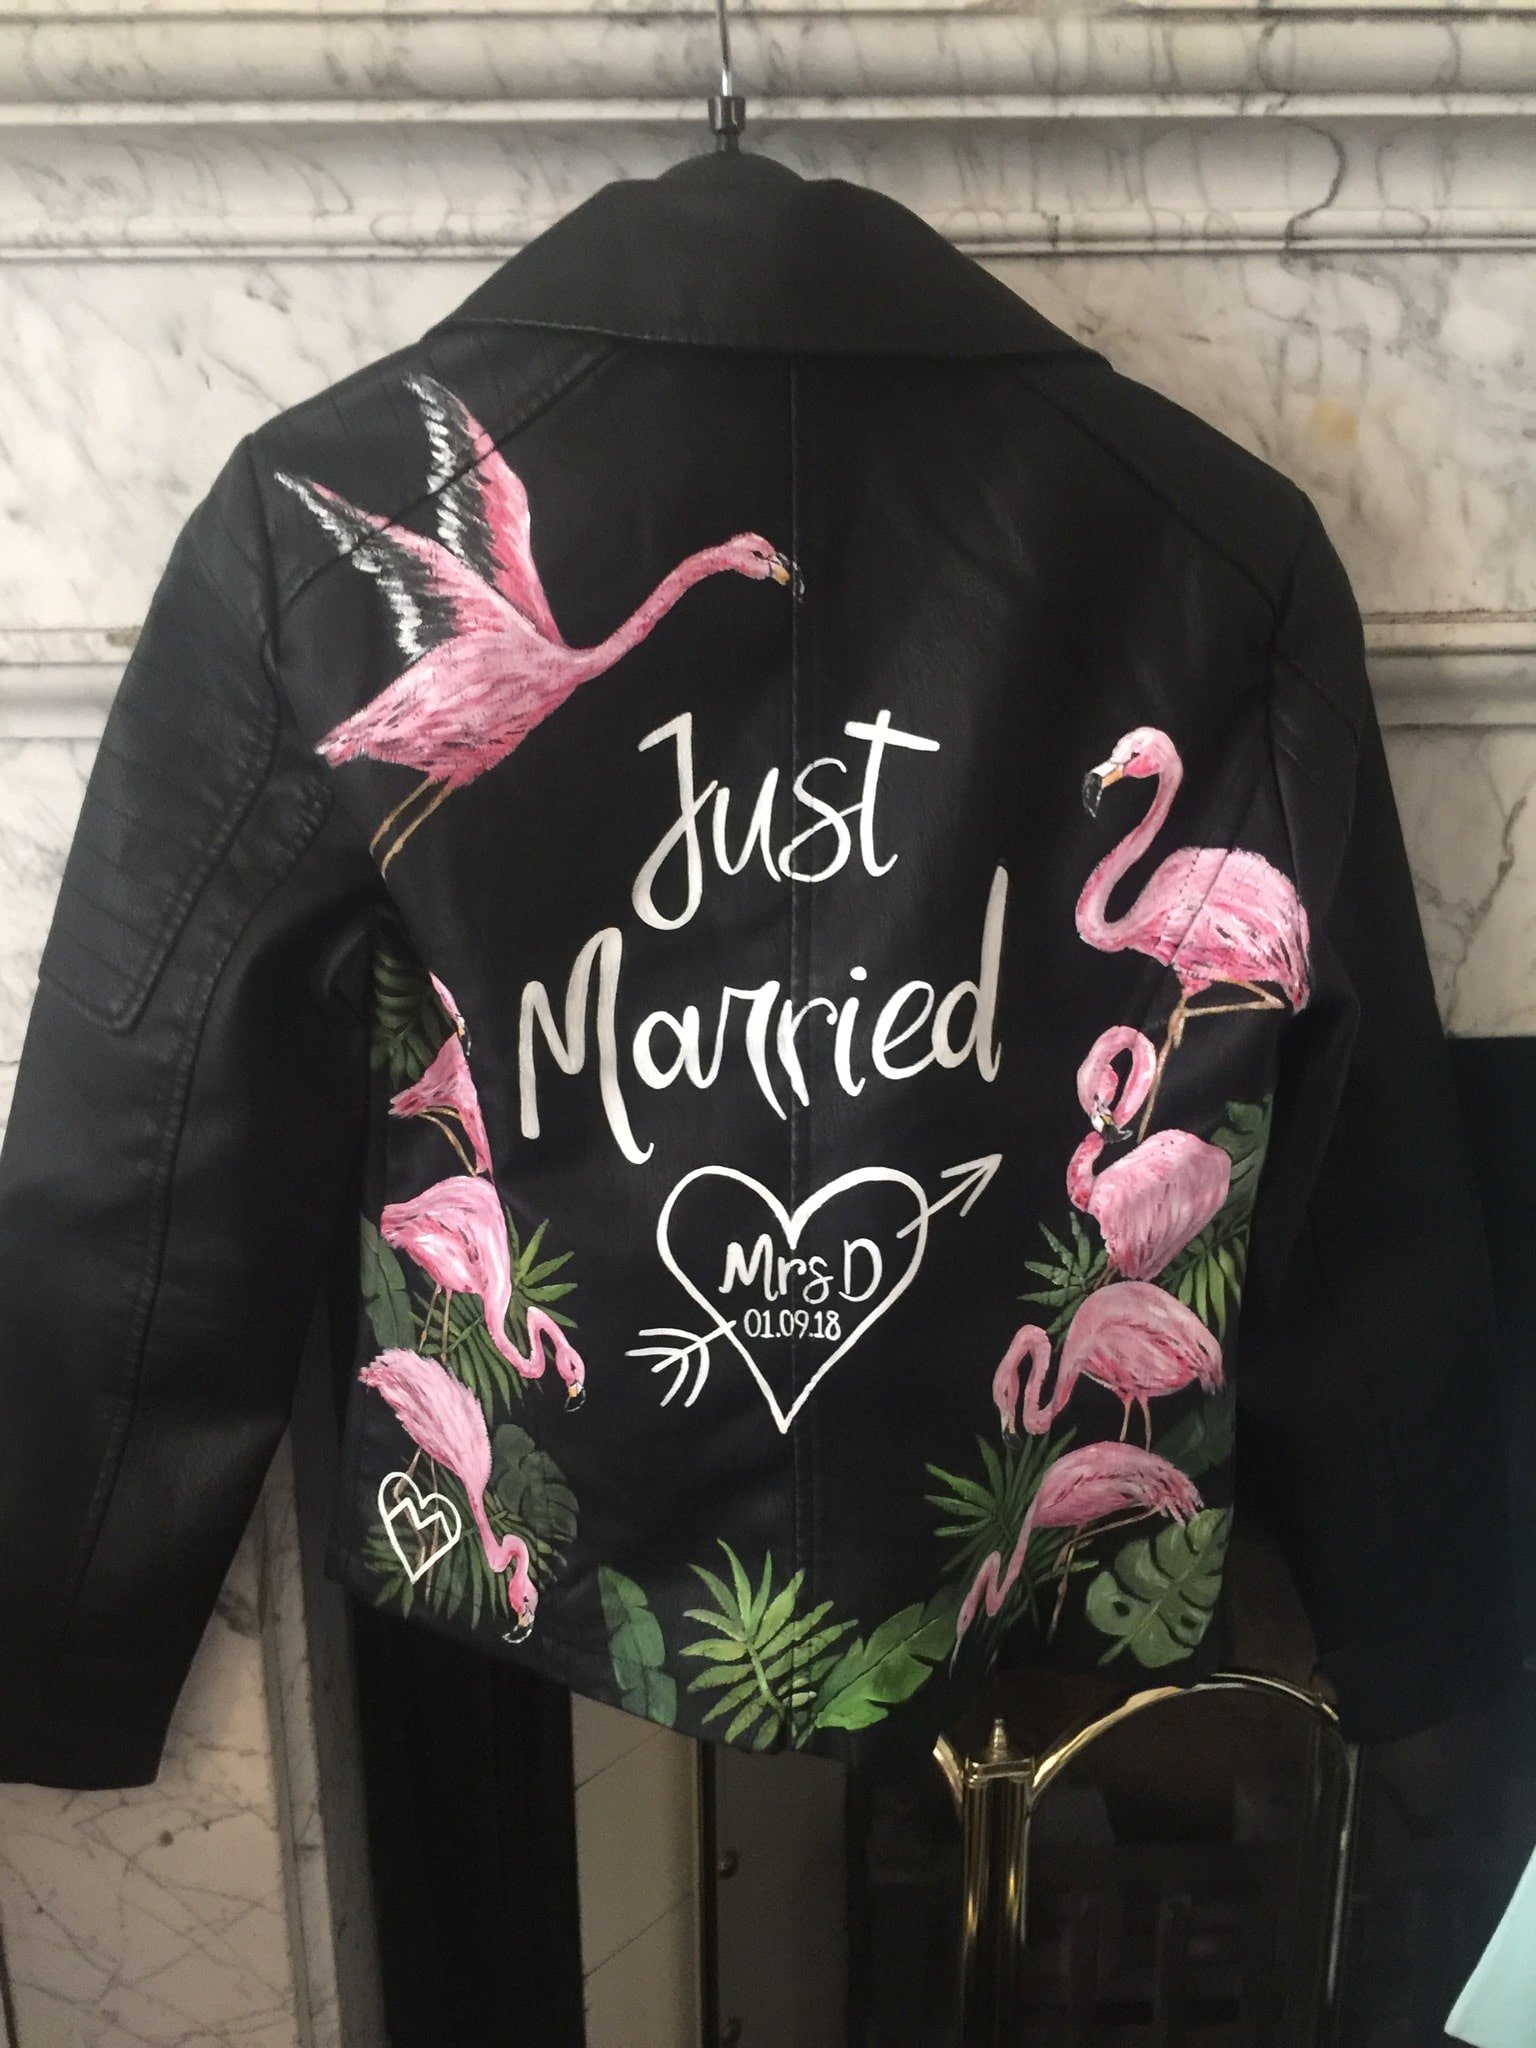 Her custom made leather jacket with "Just Married" painted on it, was fab we thought.